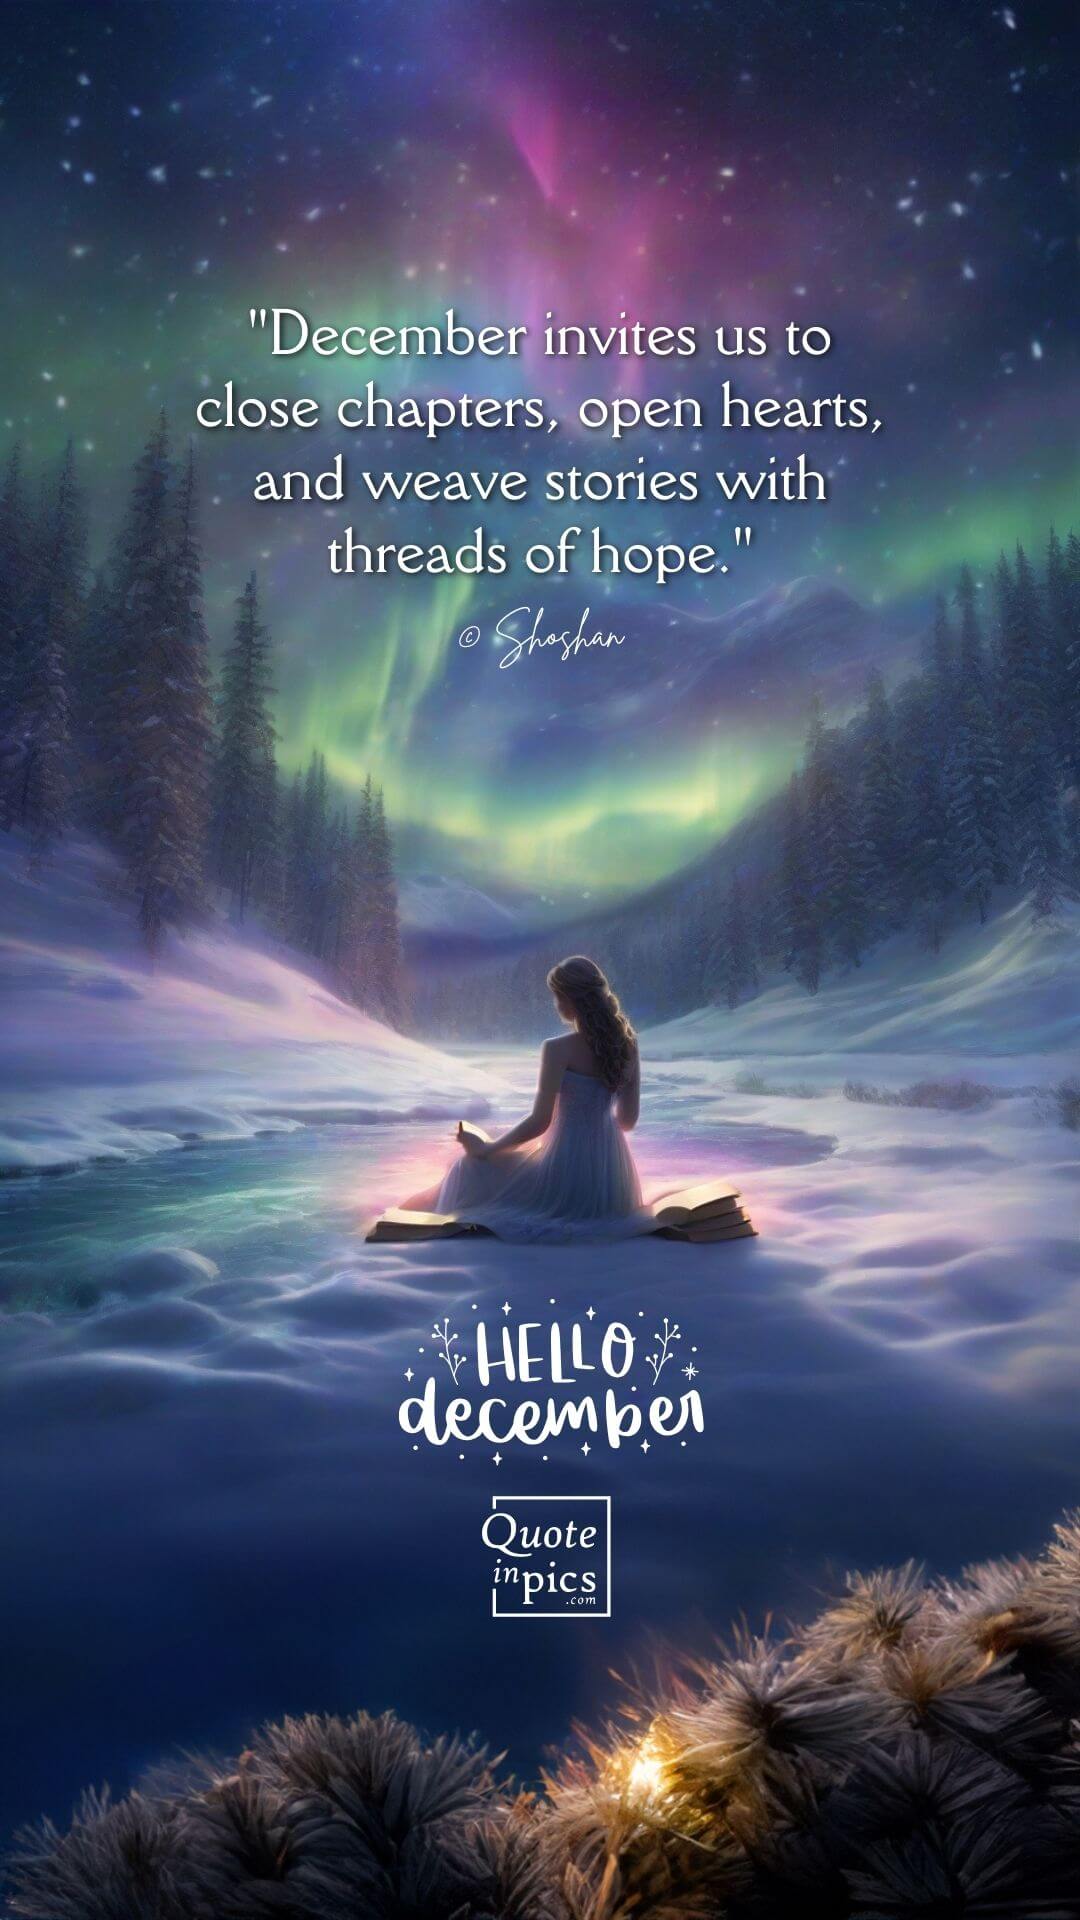 Beautiful image and quote to welcome December